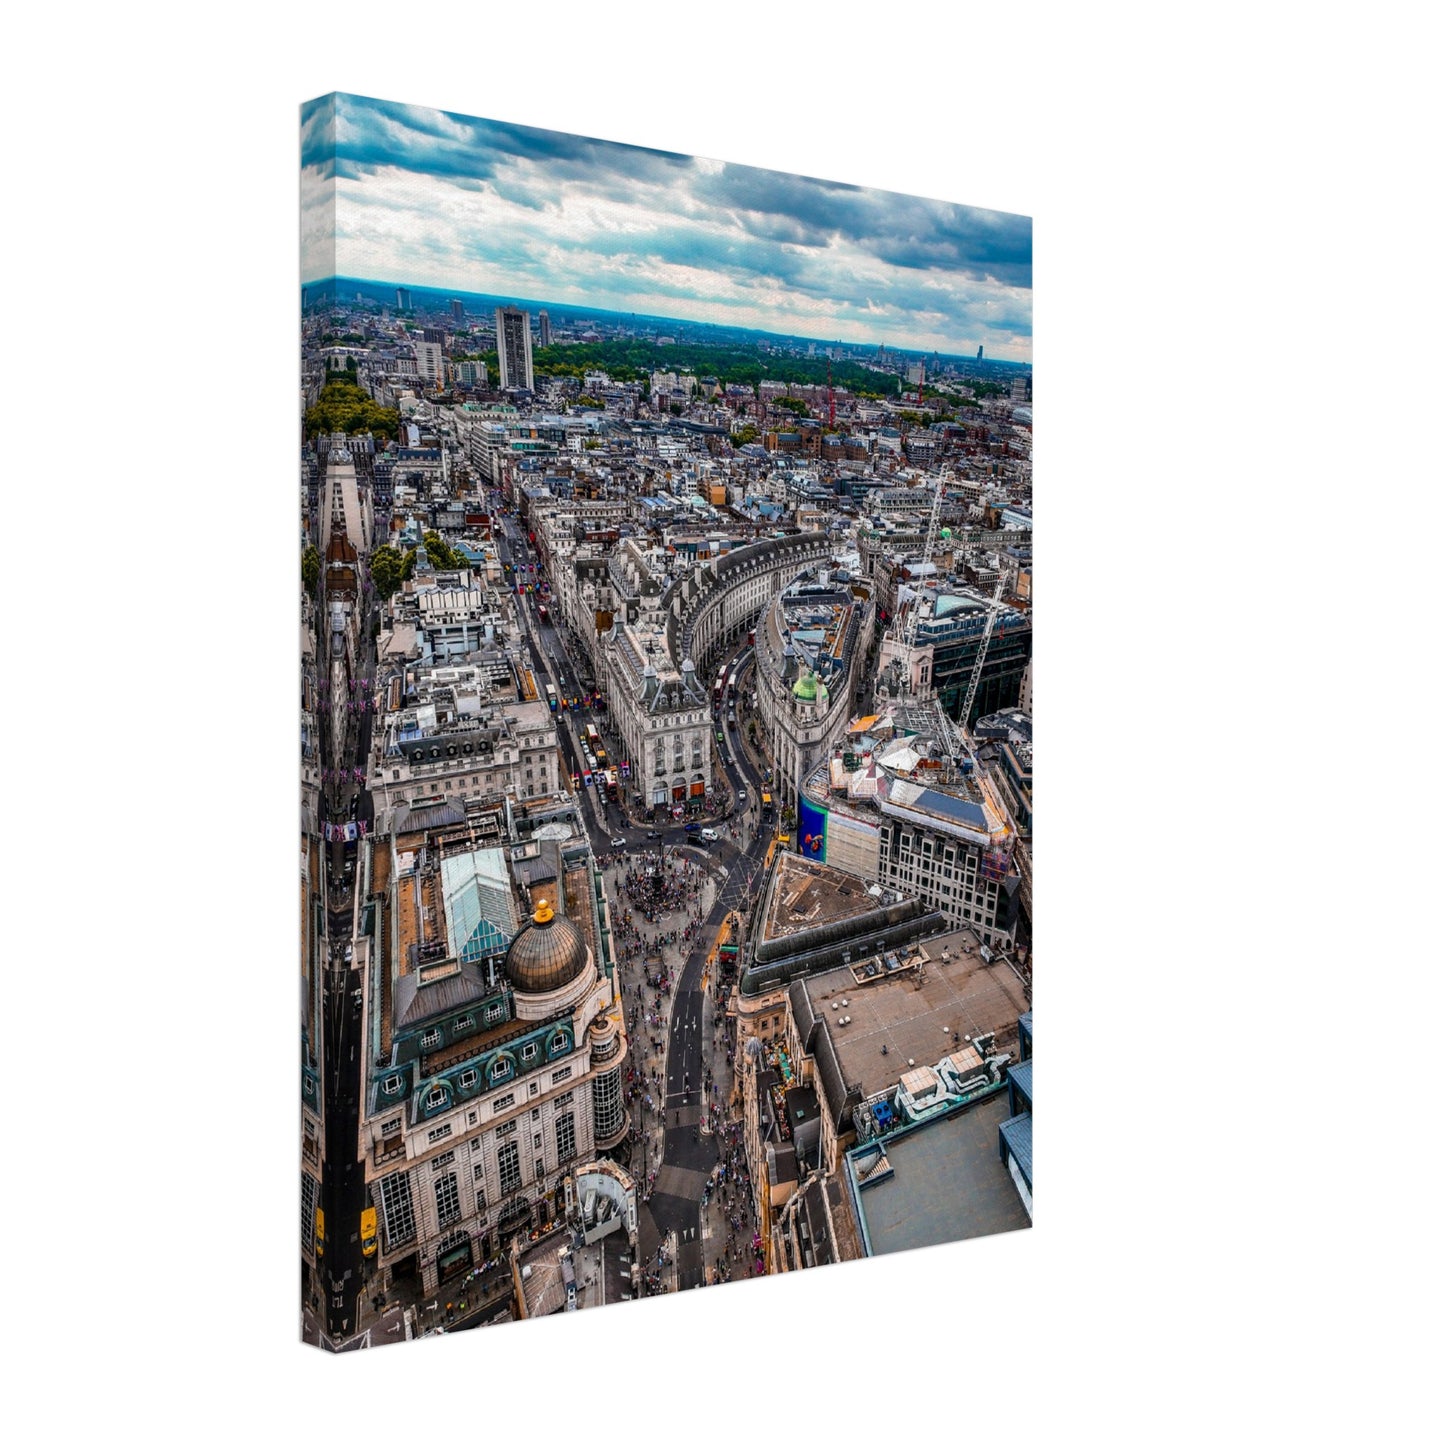 London Piccadilly Circus Canvas